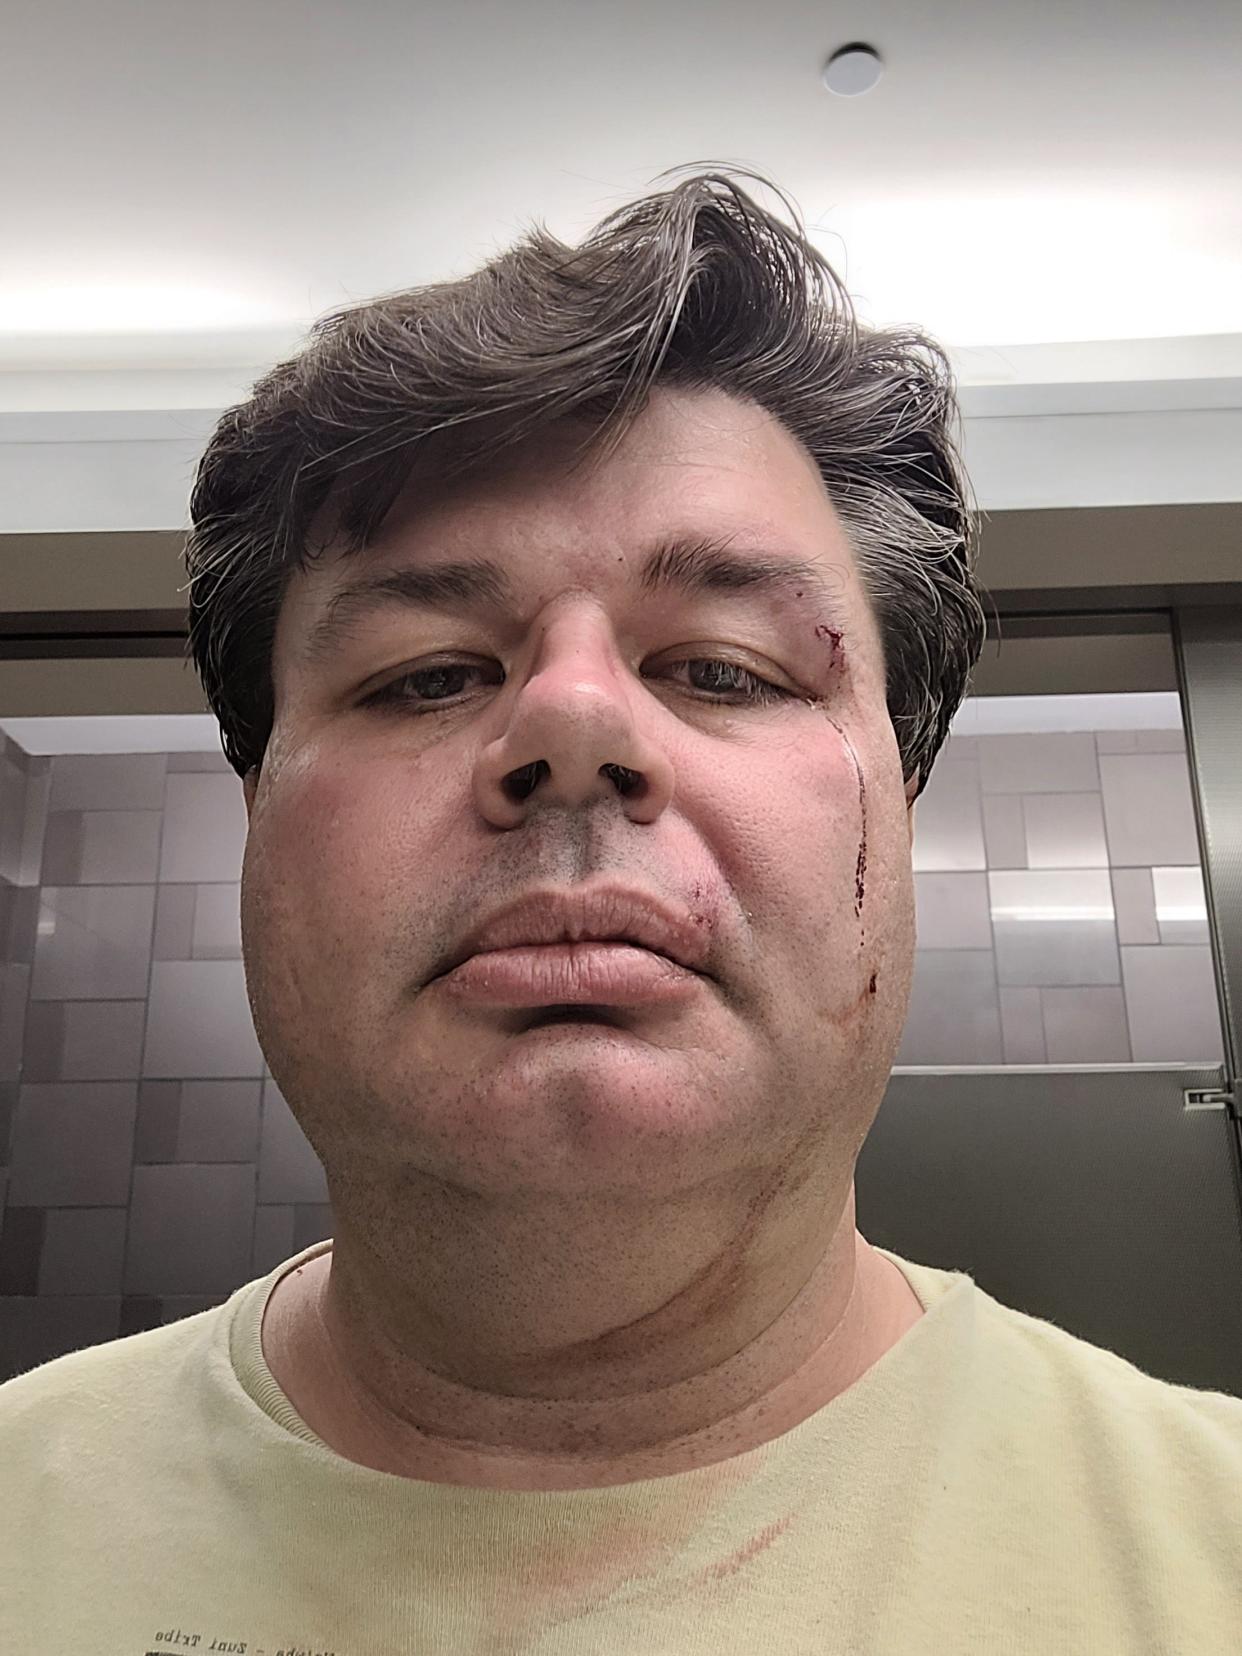 David Boyles, an instructor at Arizona State University, posted a photo of his injuries on Instagram after two unknown people confronted him on Oct. 11, 2023, in a campus parking garage.